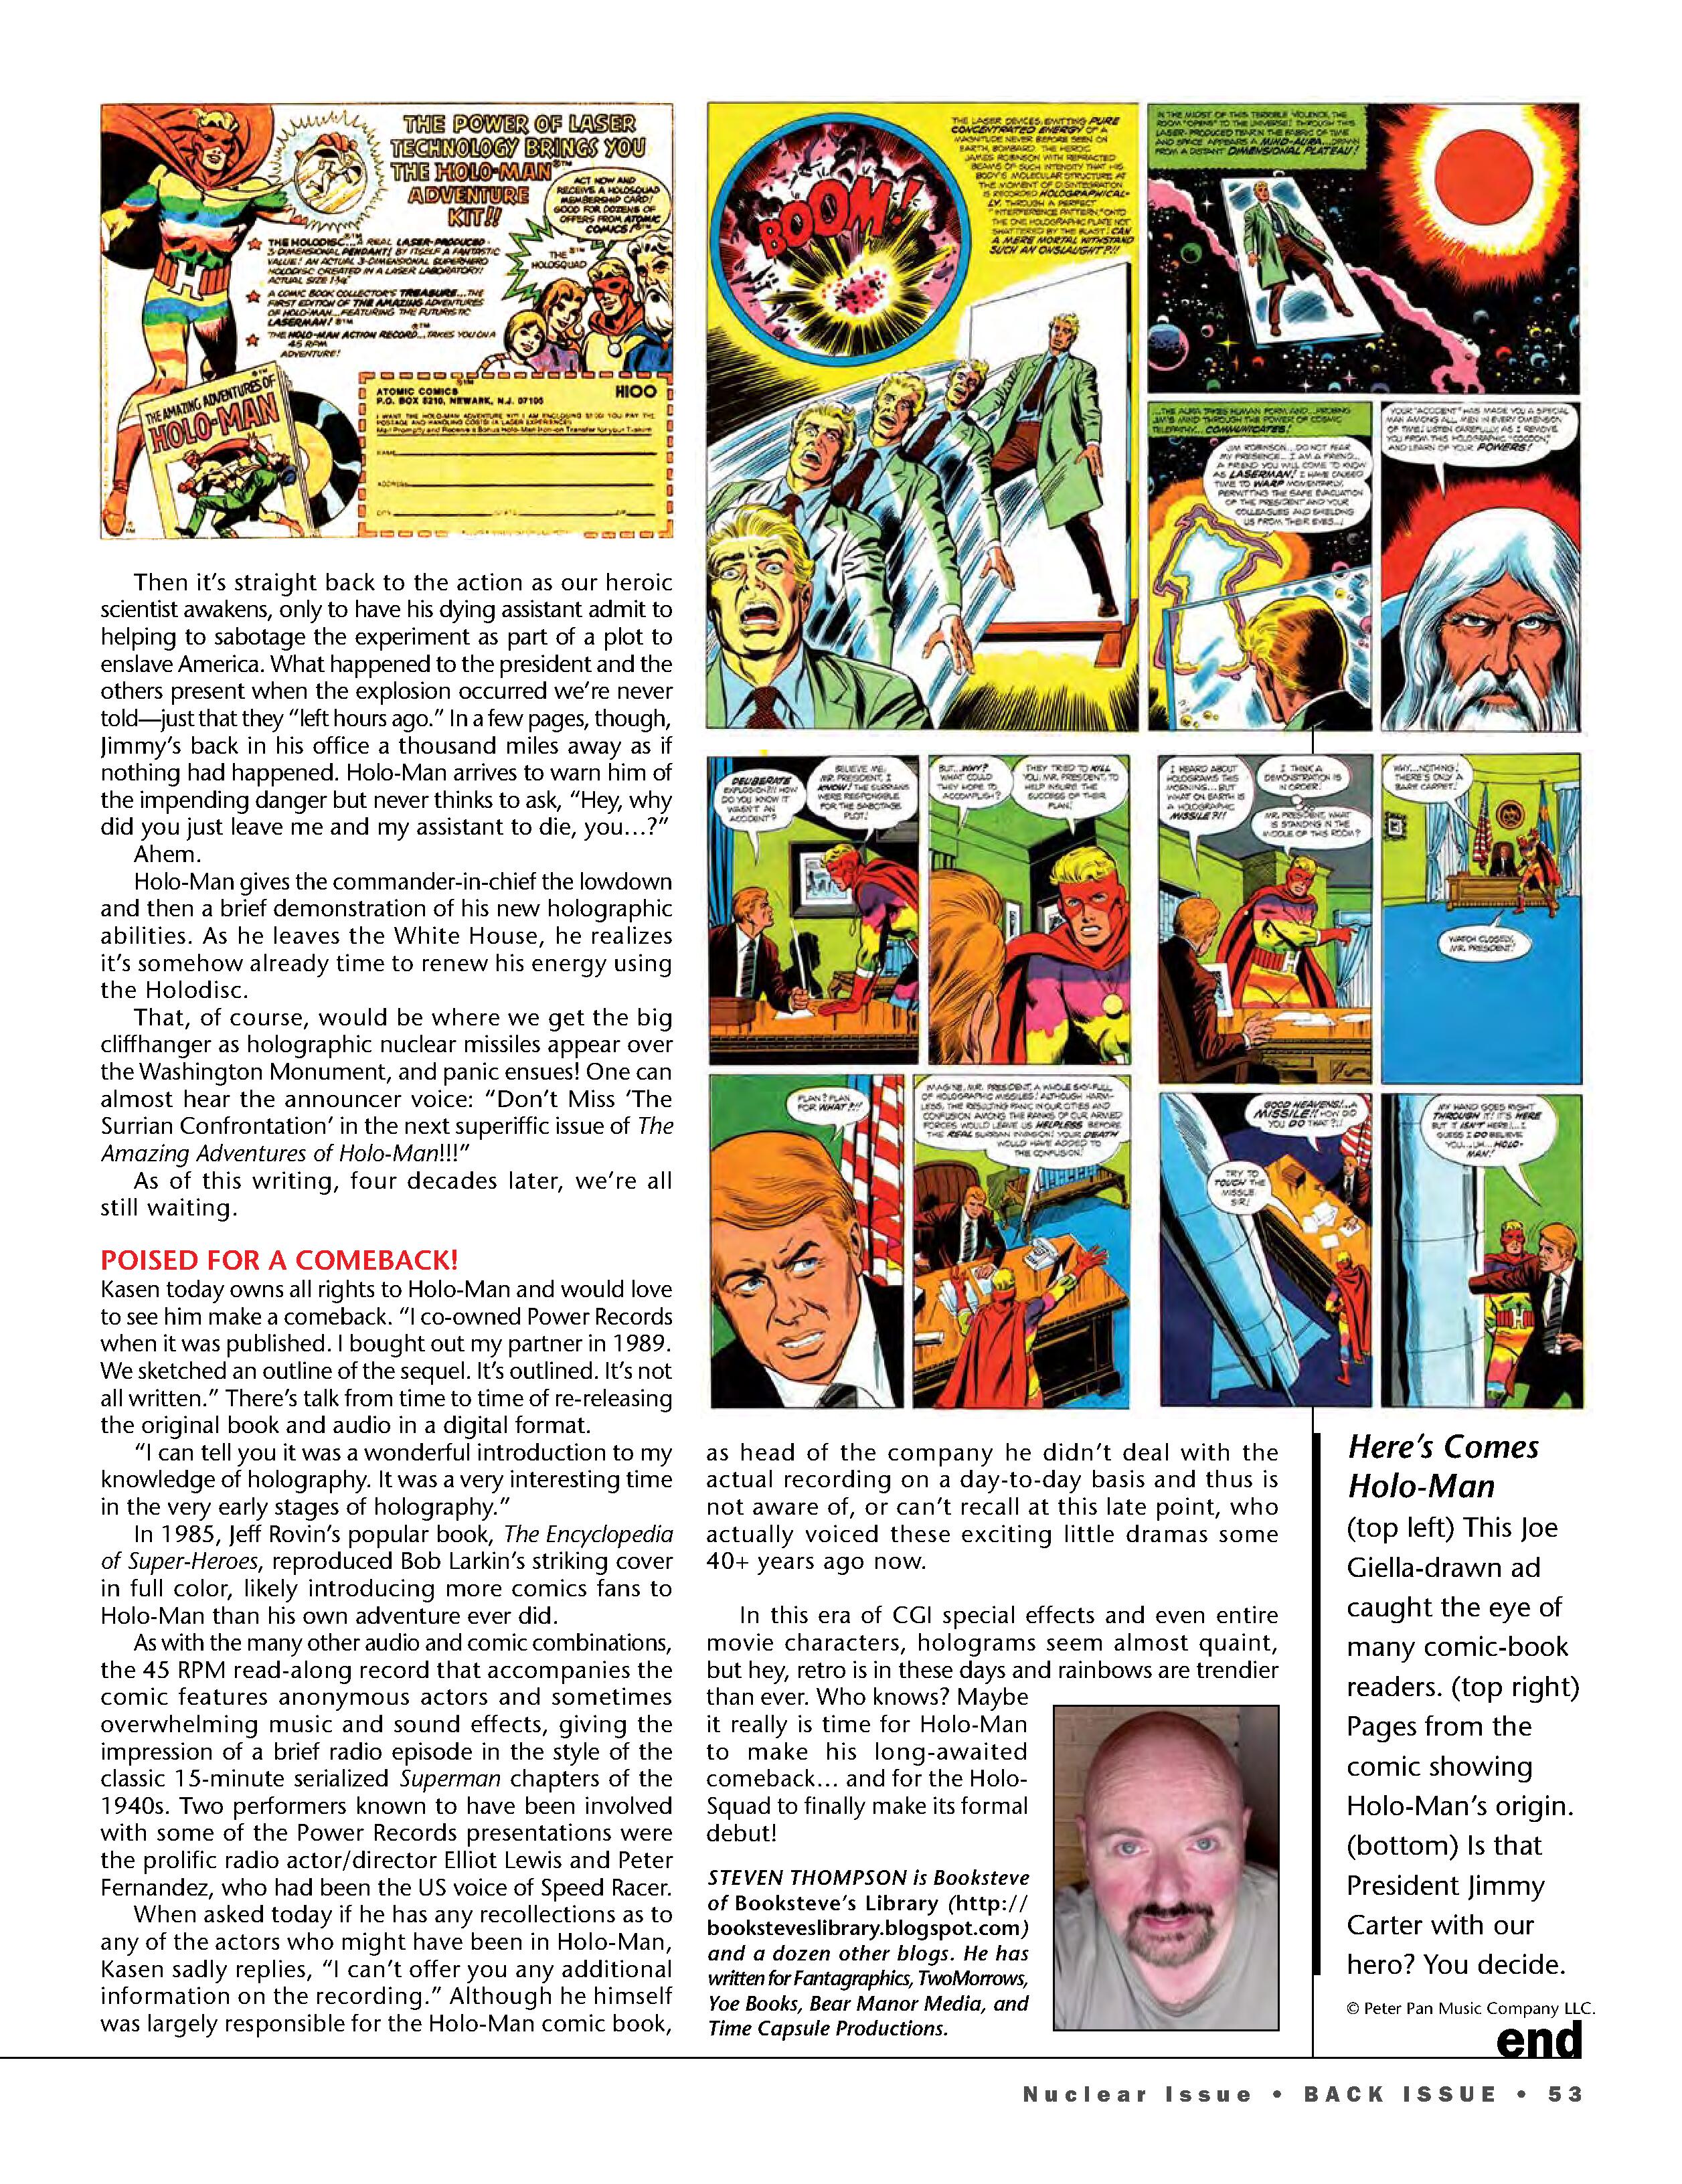 Read online Back Issue comic -  Issue #112 - 55